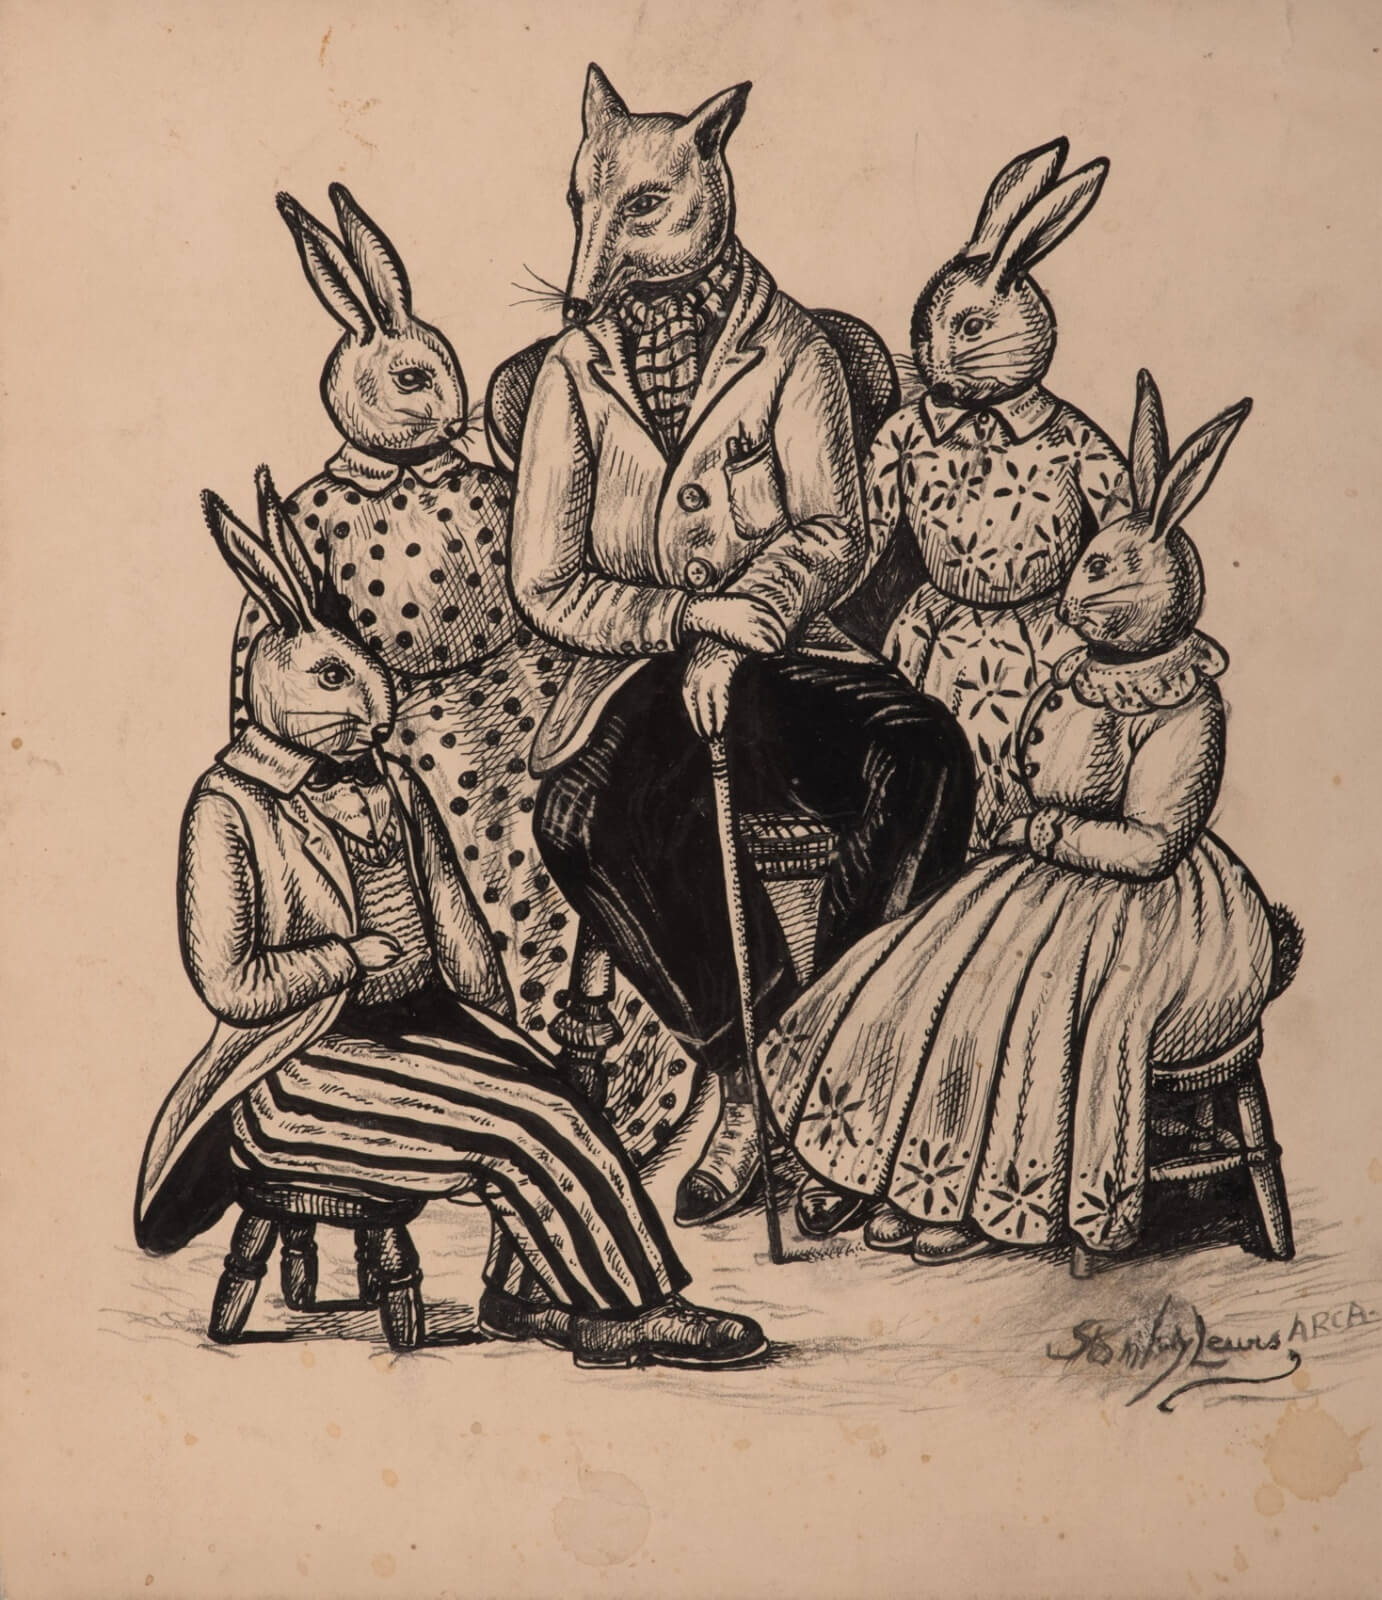 Stanley Lewis - Seated fox surrounded with rabbits